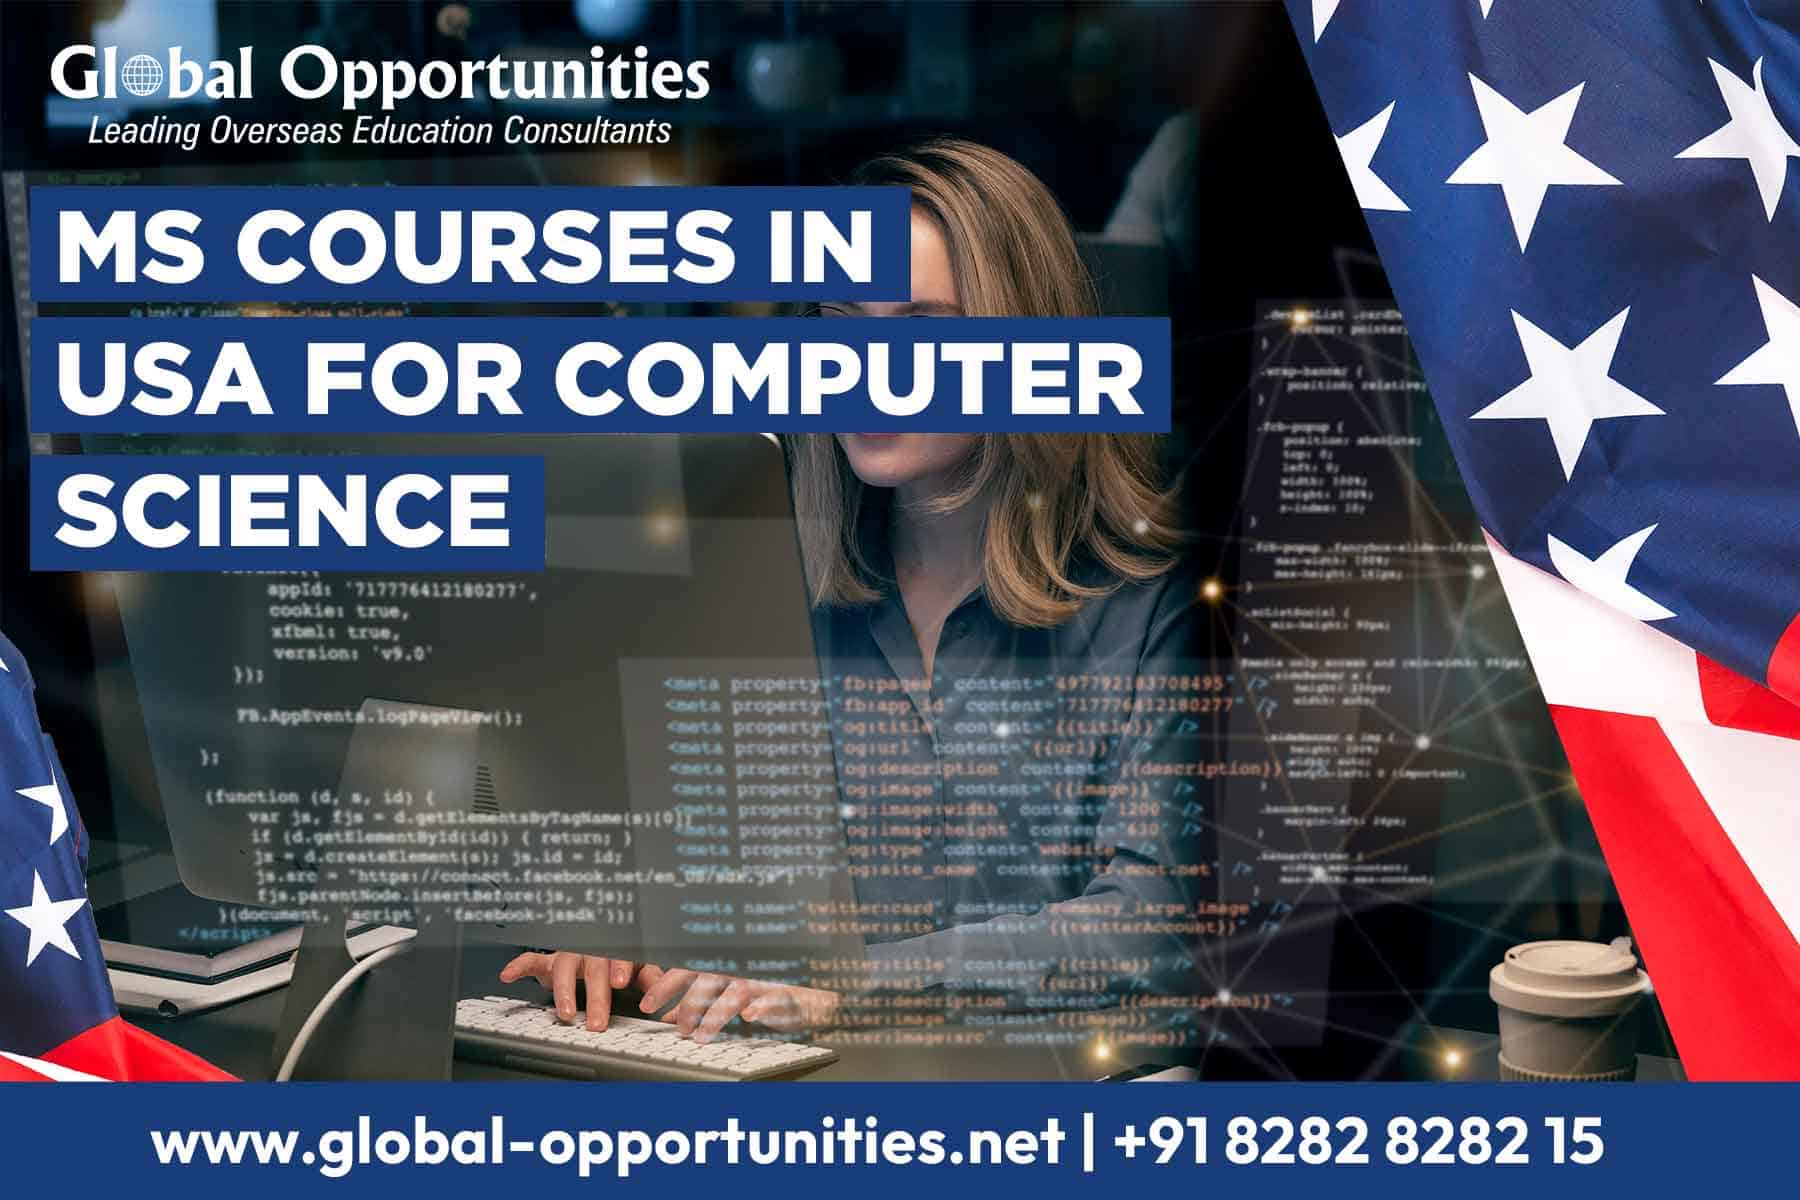 MS Courses in USA for Computer Science